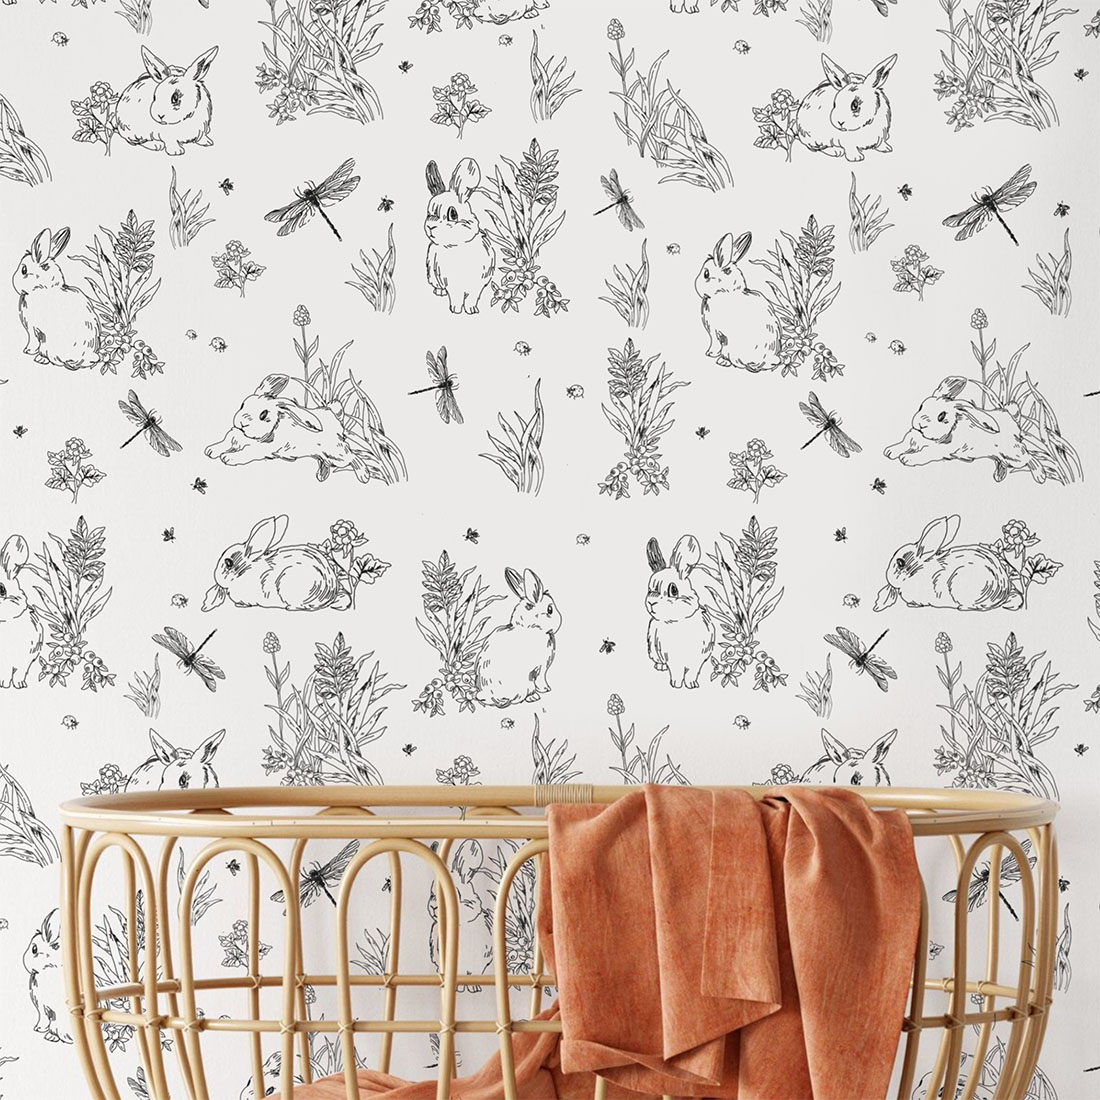 Black and white pattern with rabbits and plants.